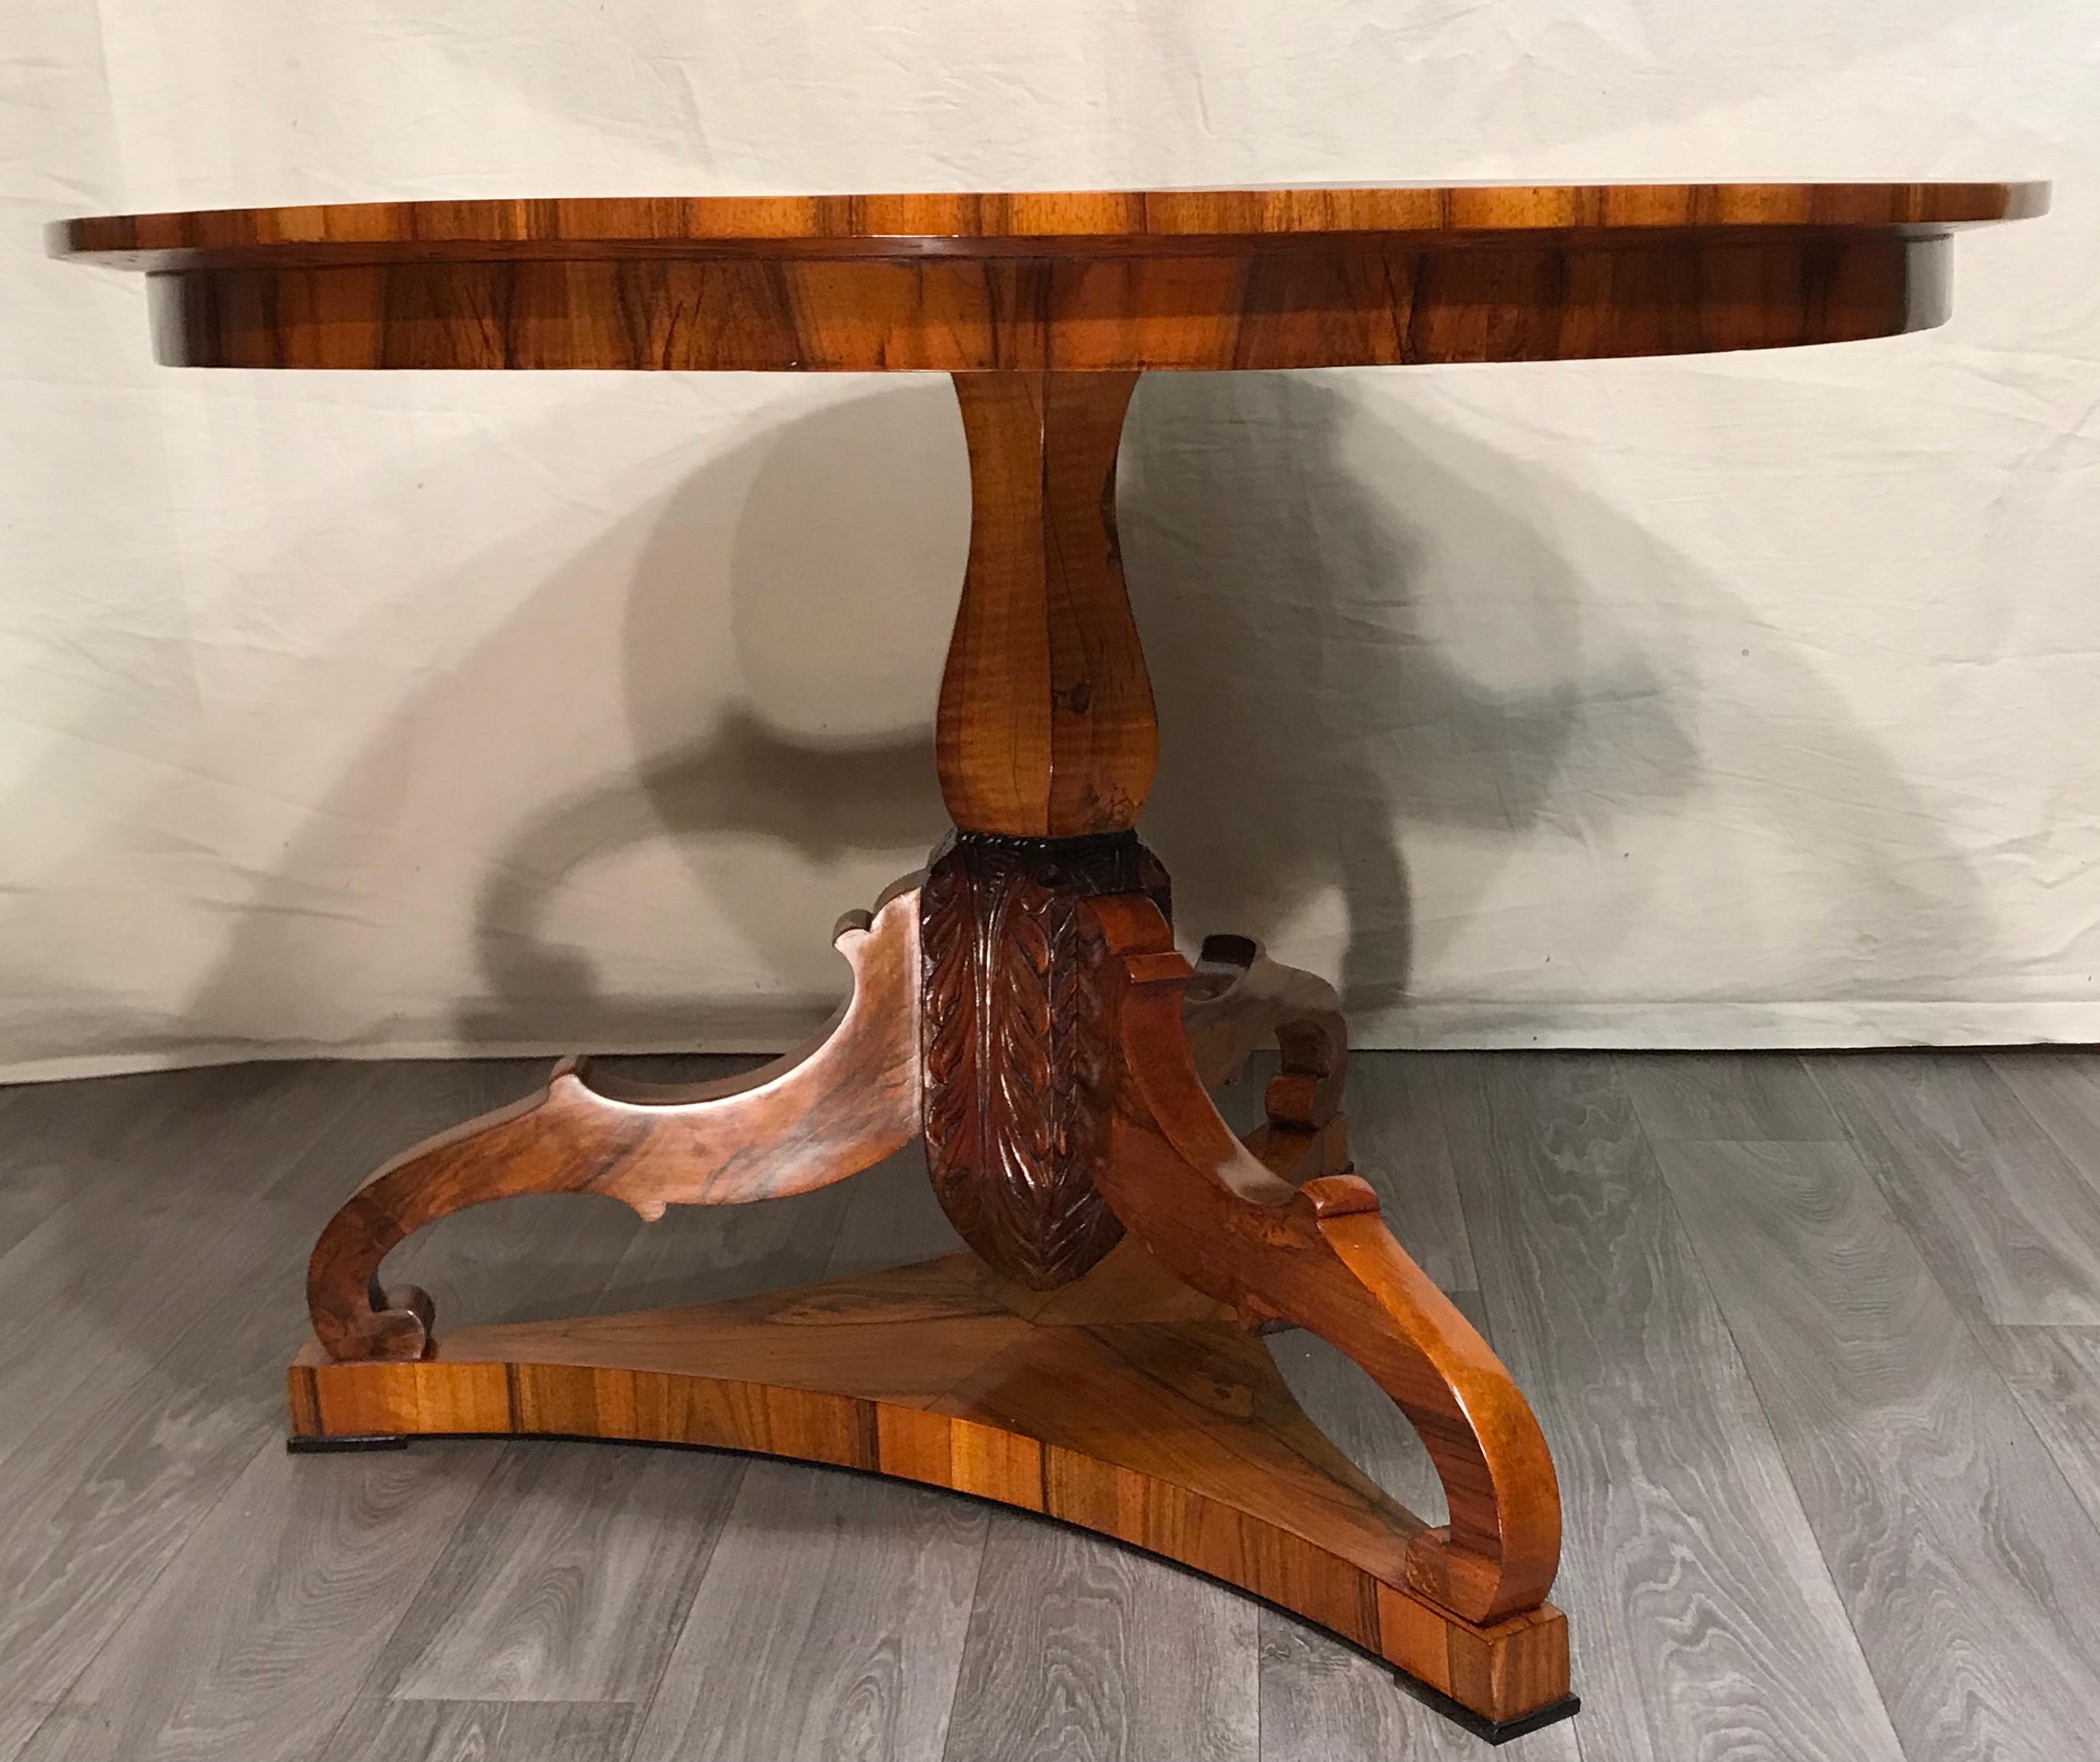 Biedermeier table, South German, 1820,
This unique Biedermeier table has a gorgeous walnut piecrust veneer on the top. The lower part of the baluster vase shaped foot is decorated with acanthus leave carvings. Additionally, three curved supports